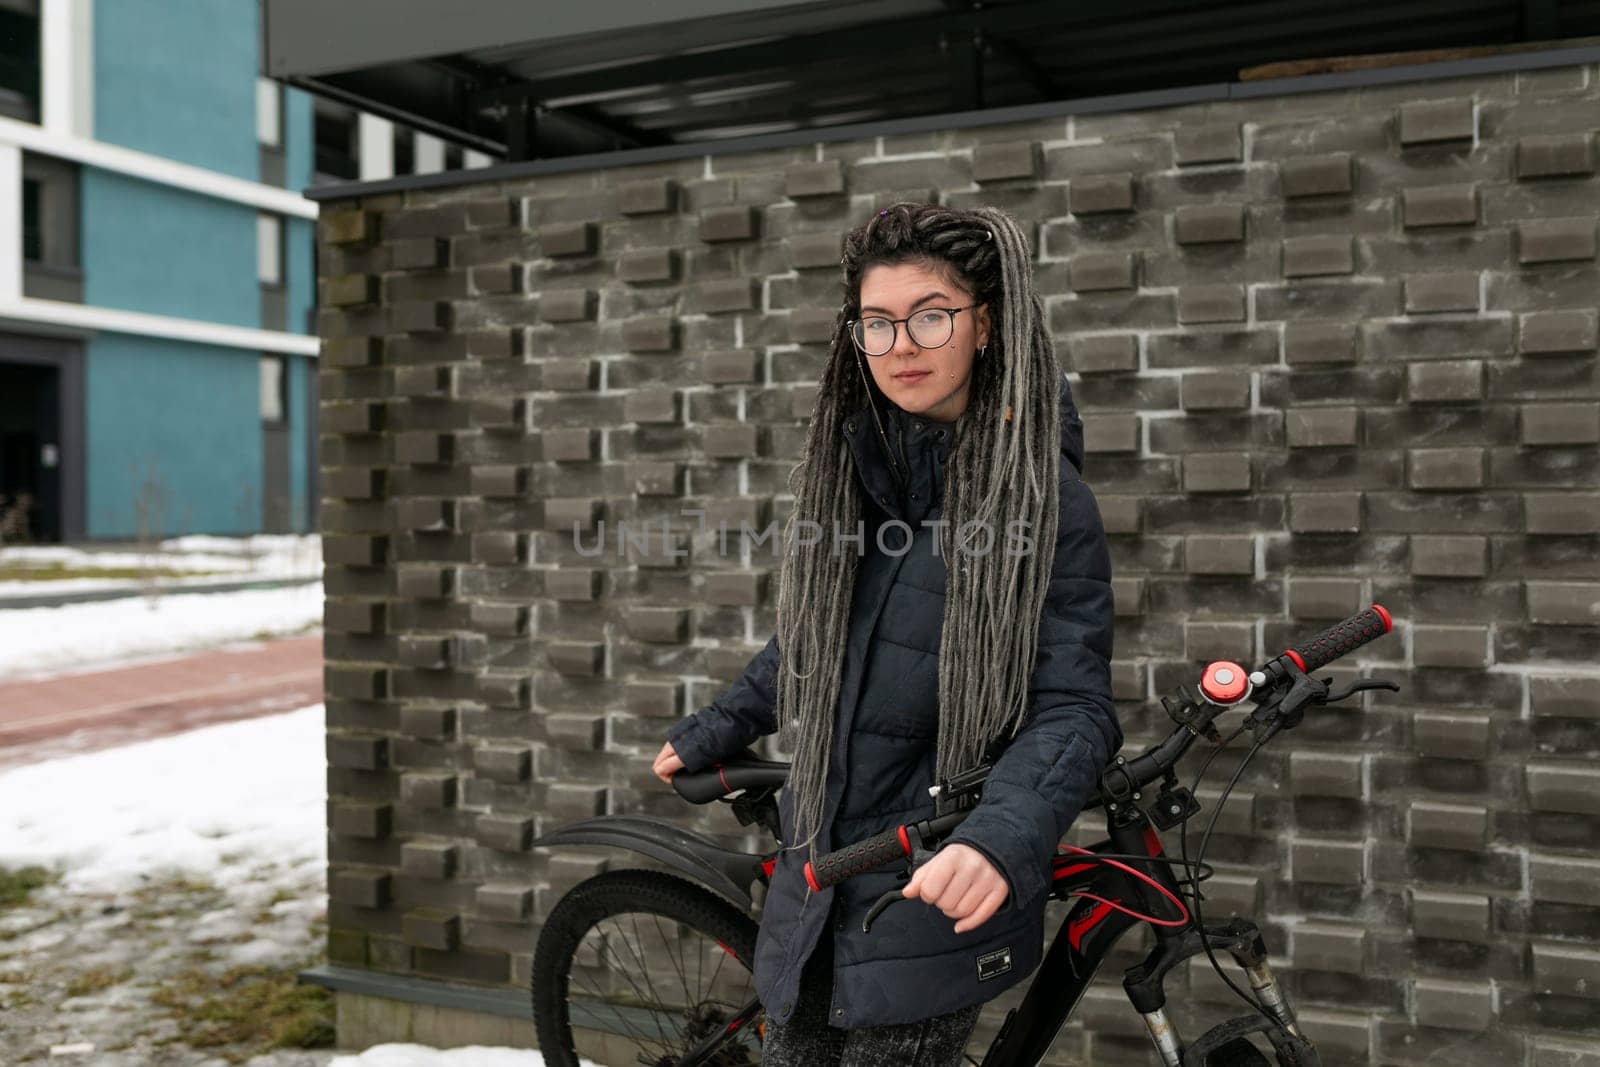 Street fashion concept, young European woman with dreadlocks riding a bicycle.